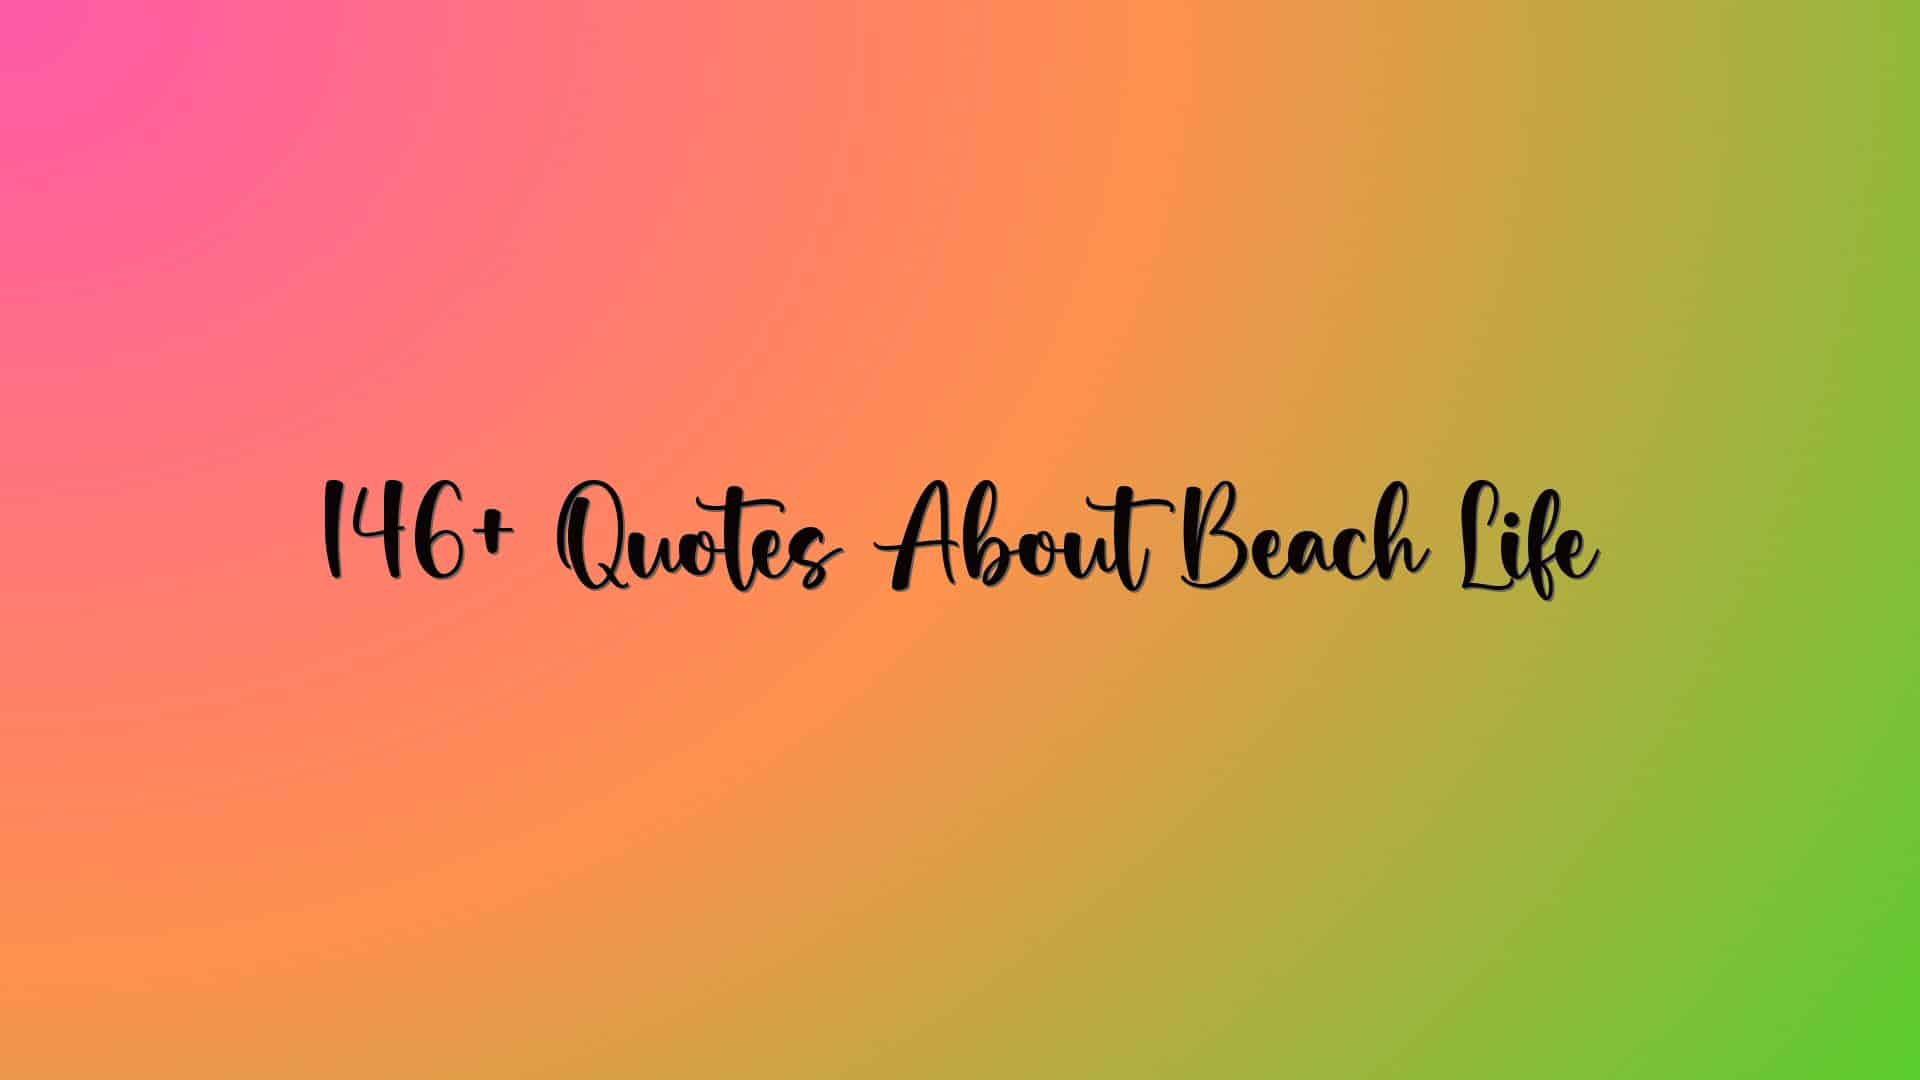 146+ Quotes About Beach Life